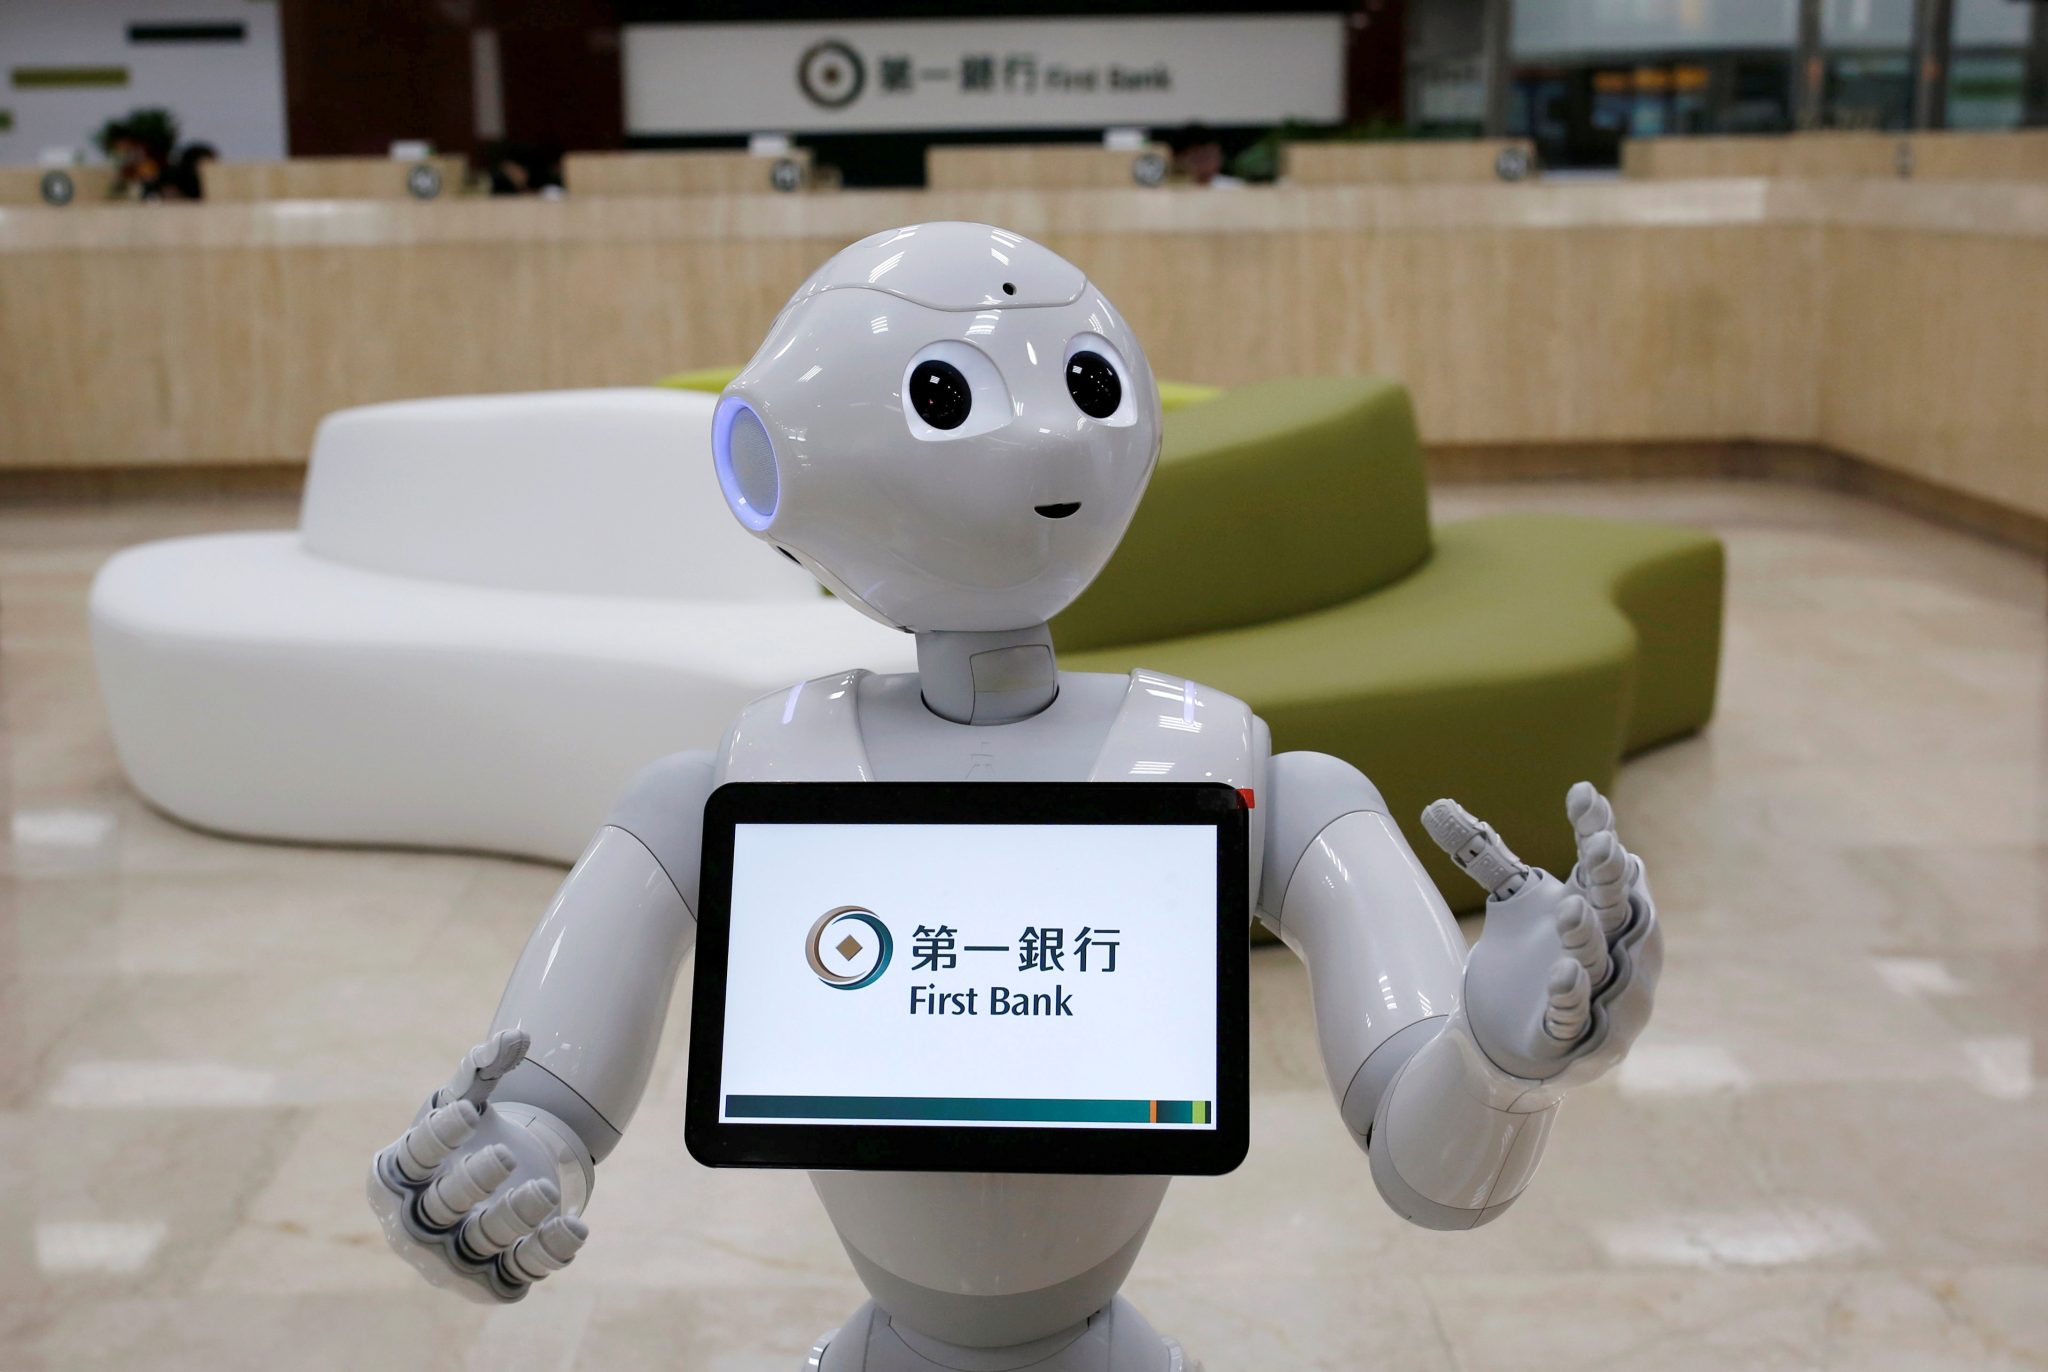 How Robots in Japanese Restaurants Tackle Labor Shortage, by Philipp Maas